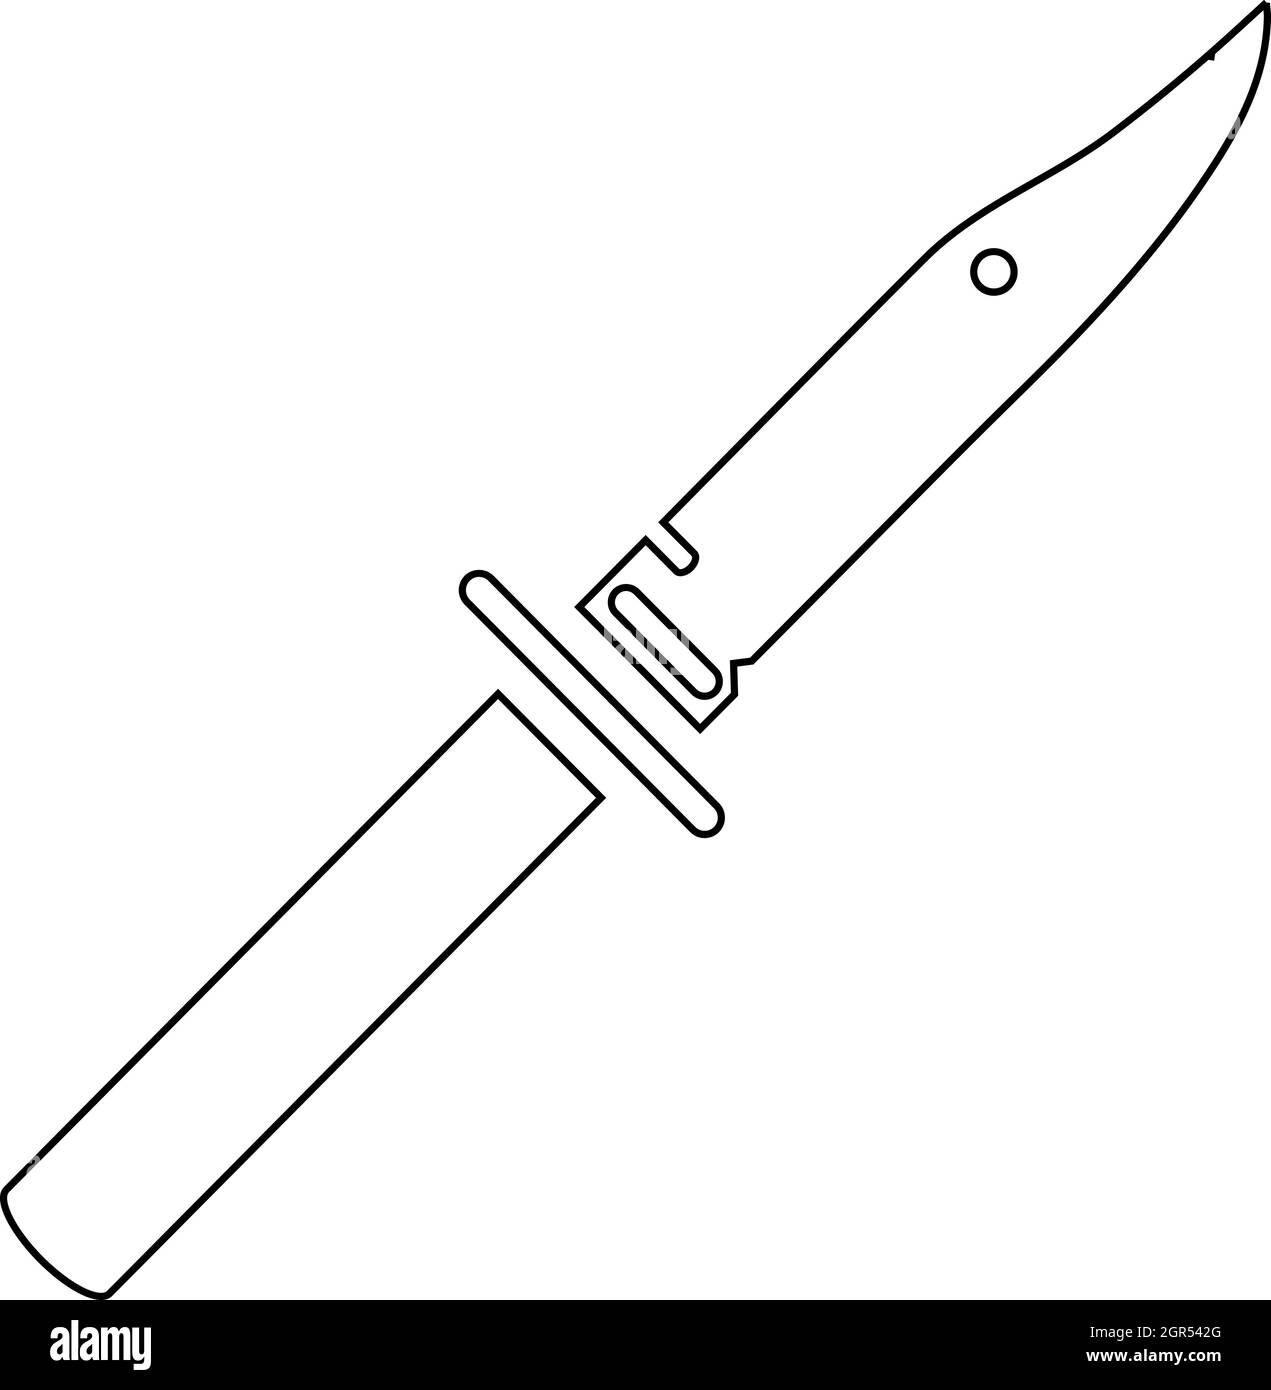 Fishing knife icon, outline style Stock Vector